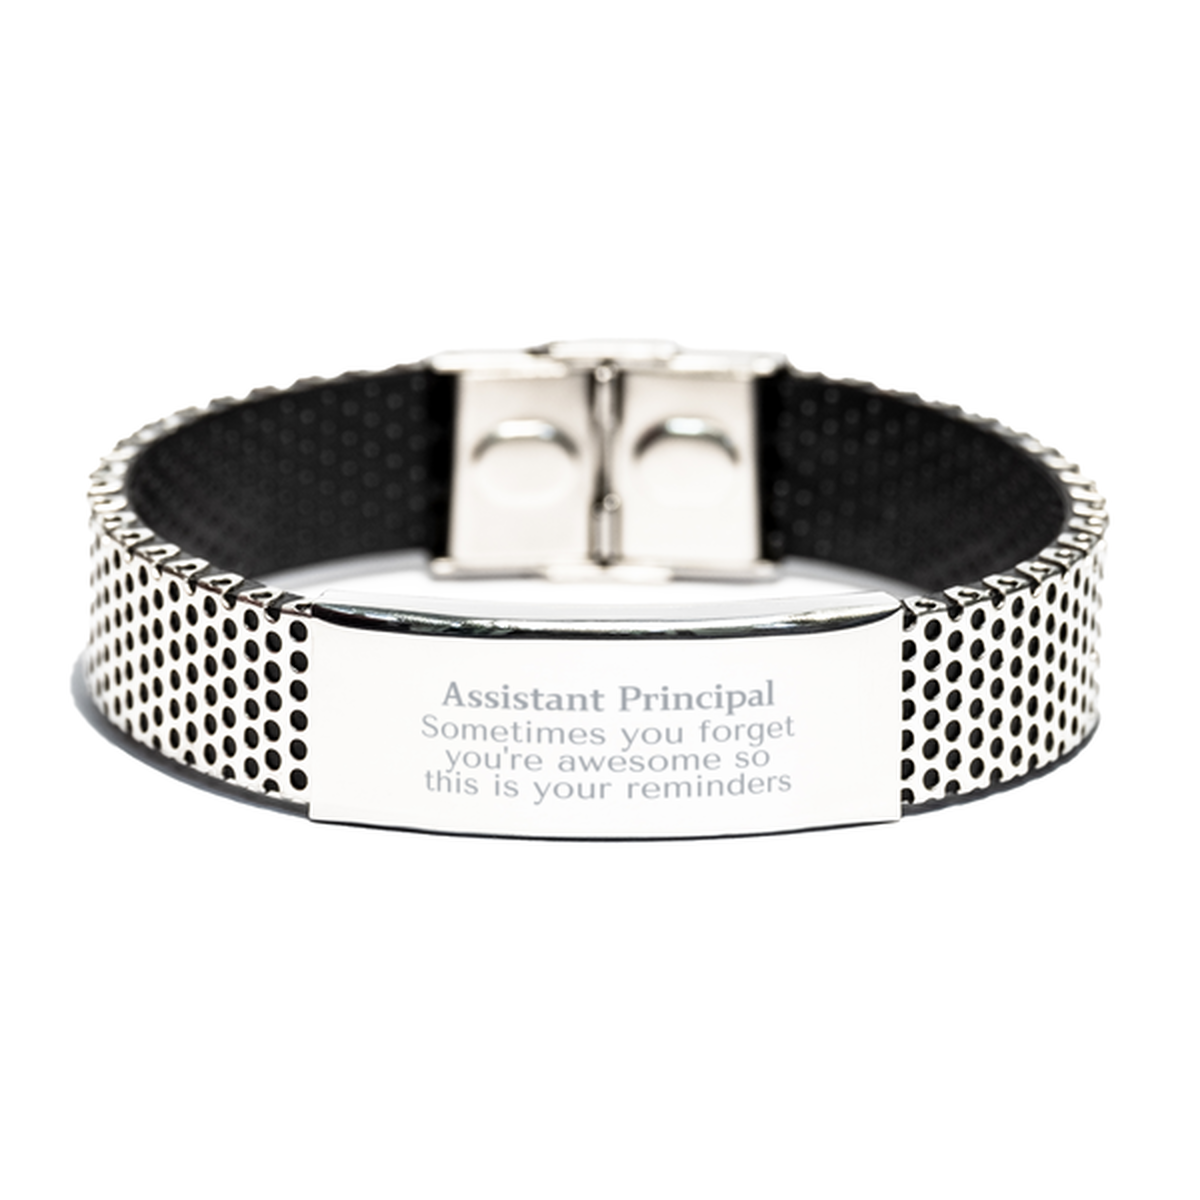 Sentimental Assistant Principal Stainless Steel Bracelet, Assistant Principal Sometimes you forget you're awesome so this is your reminders, Graduation Christmas Birthday Gifts for Assistant Principal, Men, Women, Coworkers